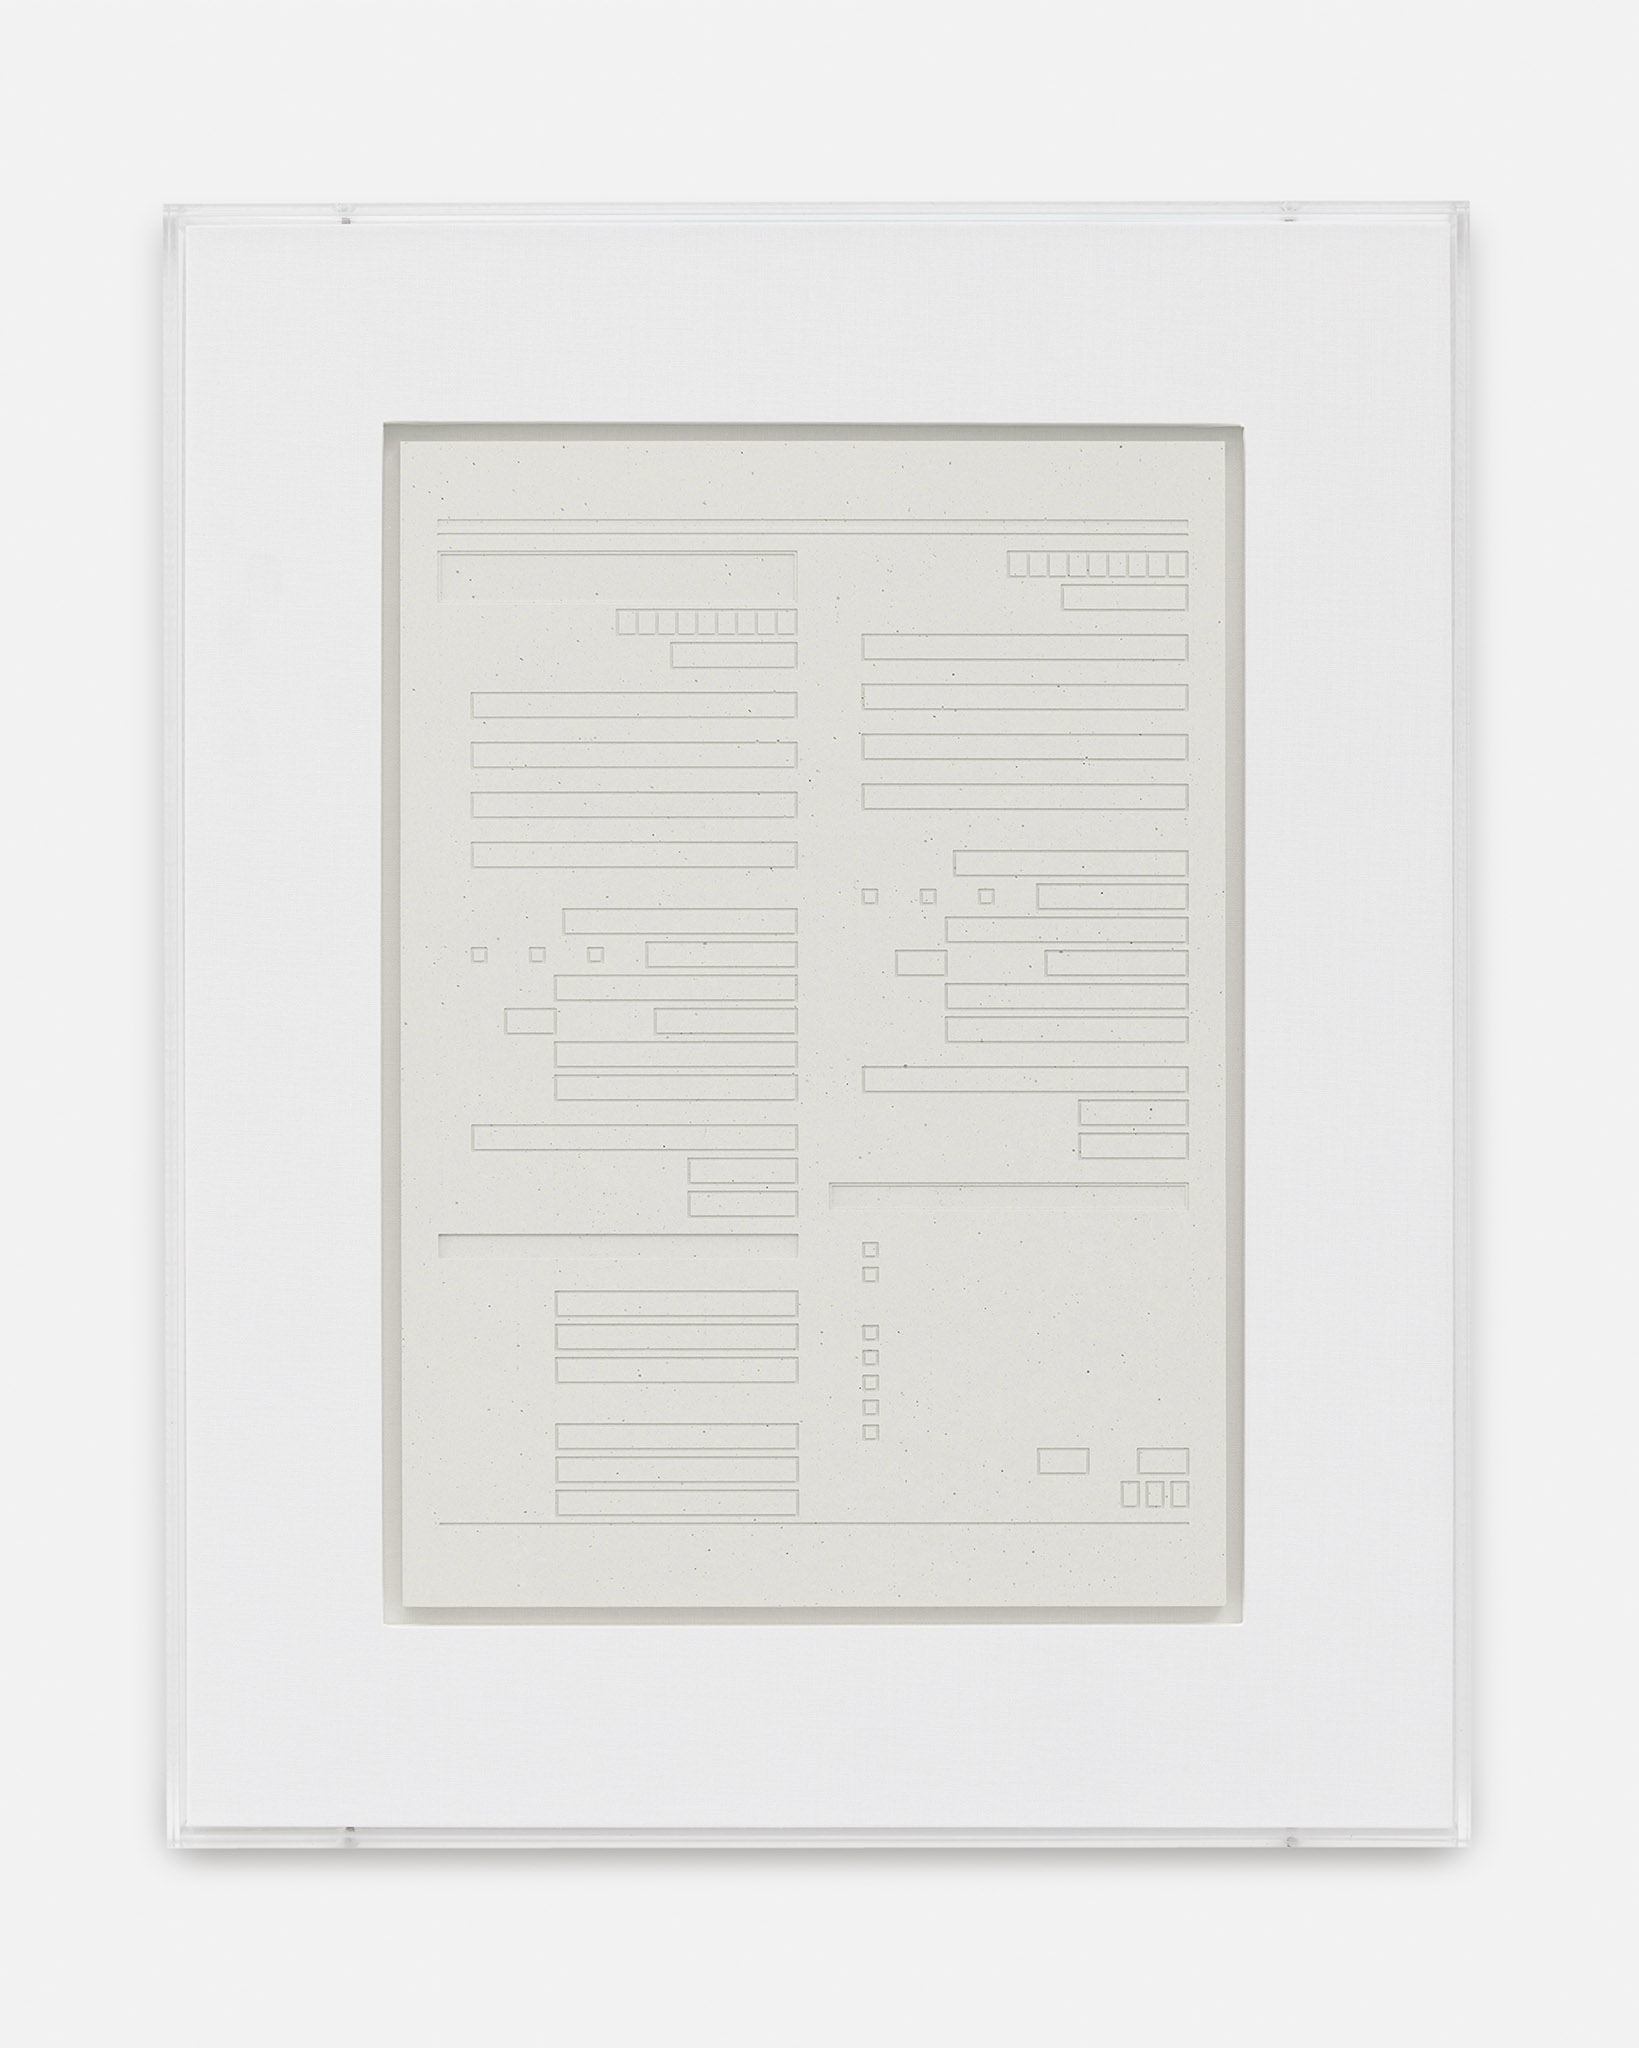 Sung Tieu, Grid form I-881, 2022, Plaster, framed in linen on wood and perspex, Exhibition view MUDAM Luxembourg, 2022